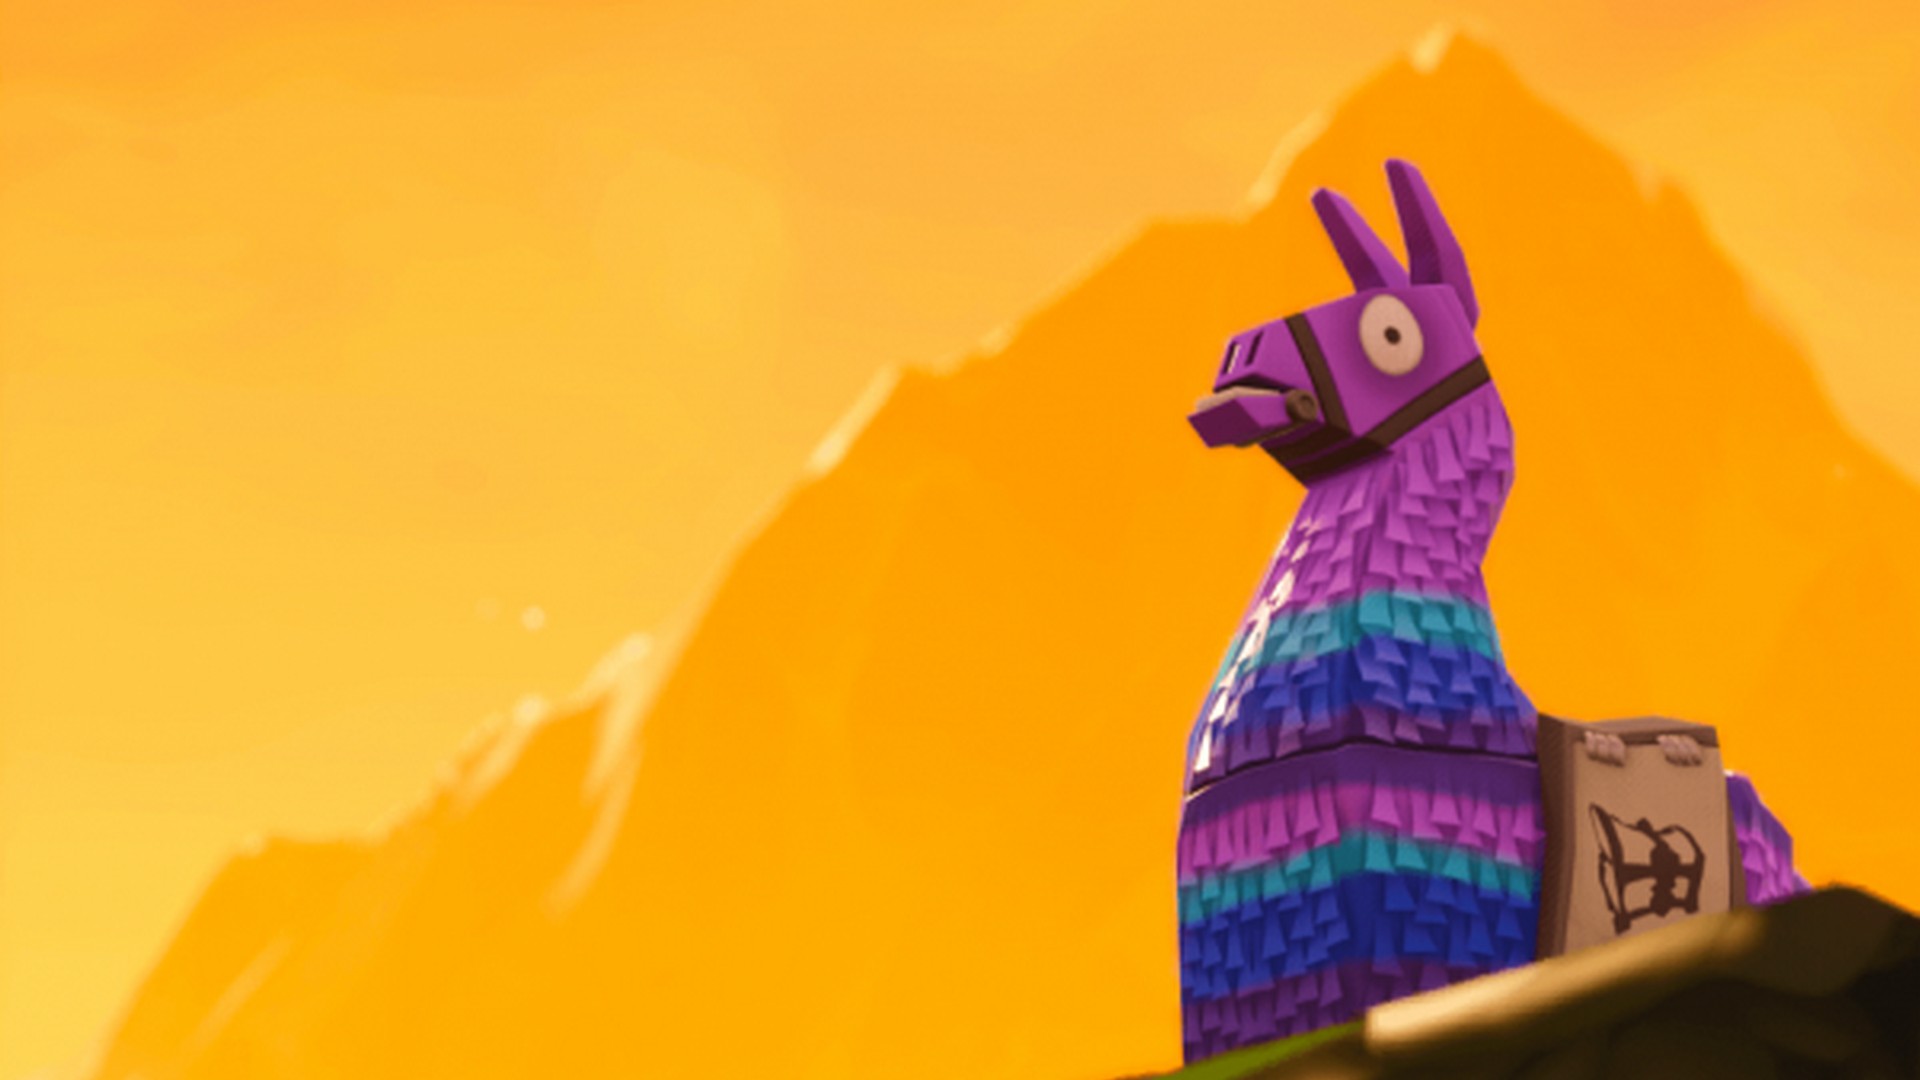 Best Fortnite Wallpaper With high-resolution 1920X1080 pixel. You can use this wallpaper for your Windows and Mac OS computers as well as your Android and iPhone smartphones